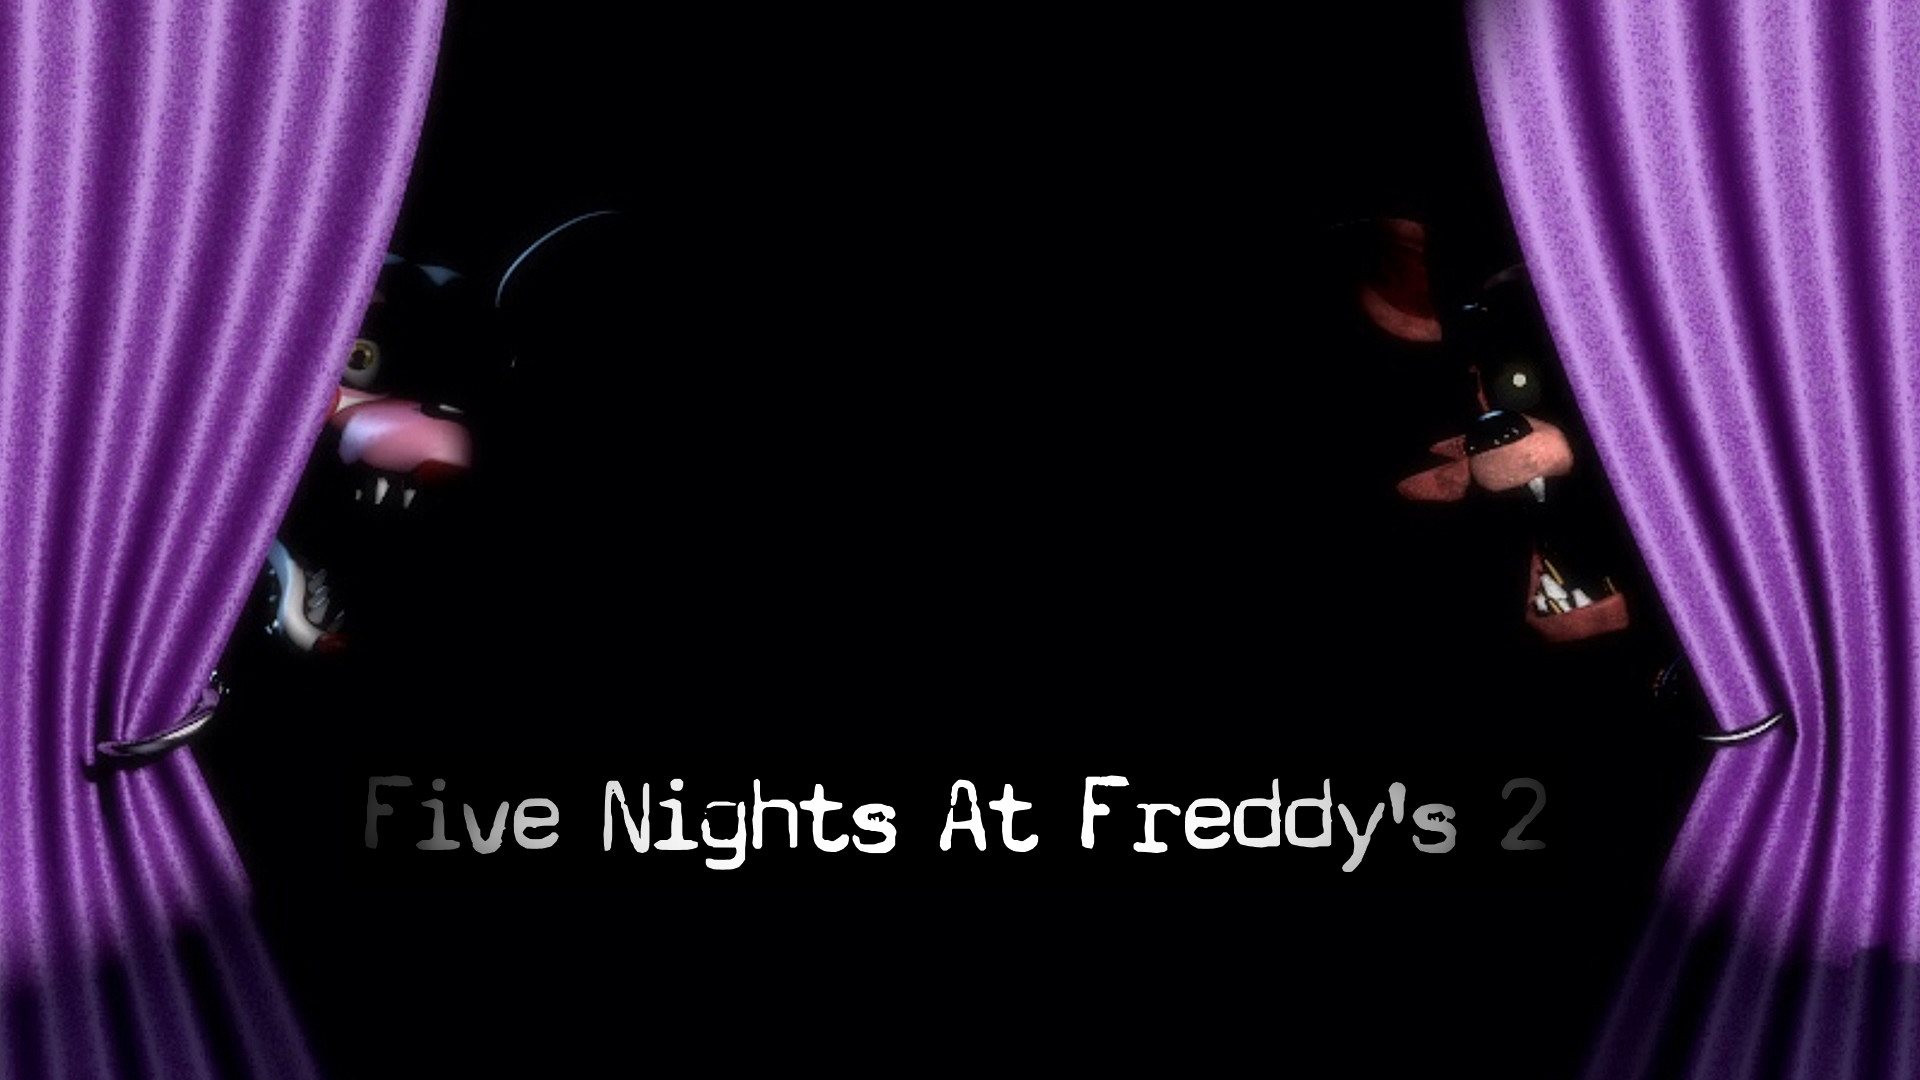 1920x1080 Five Nights At Freddys 2 Official Poster #2 by ProfessorAdagio